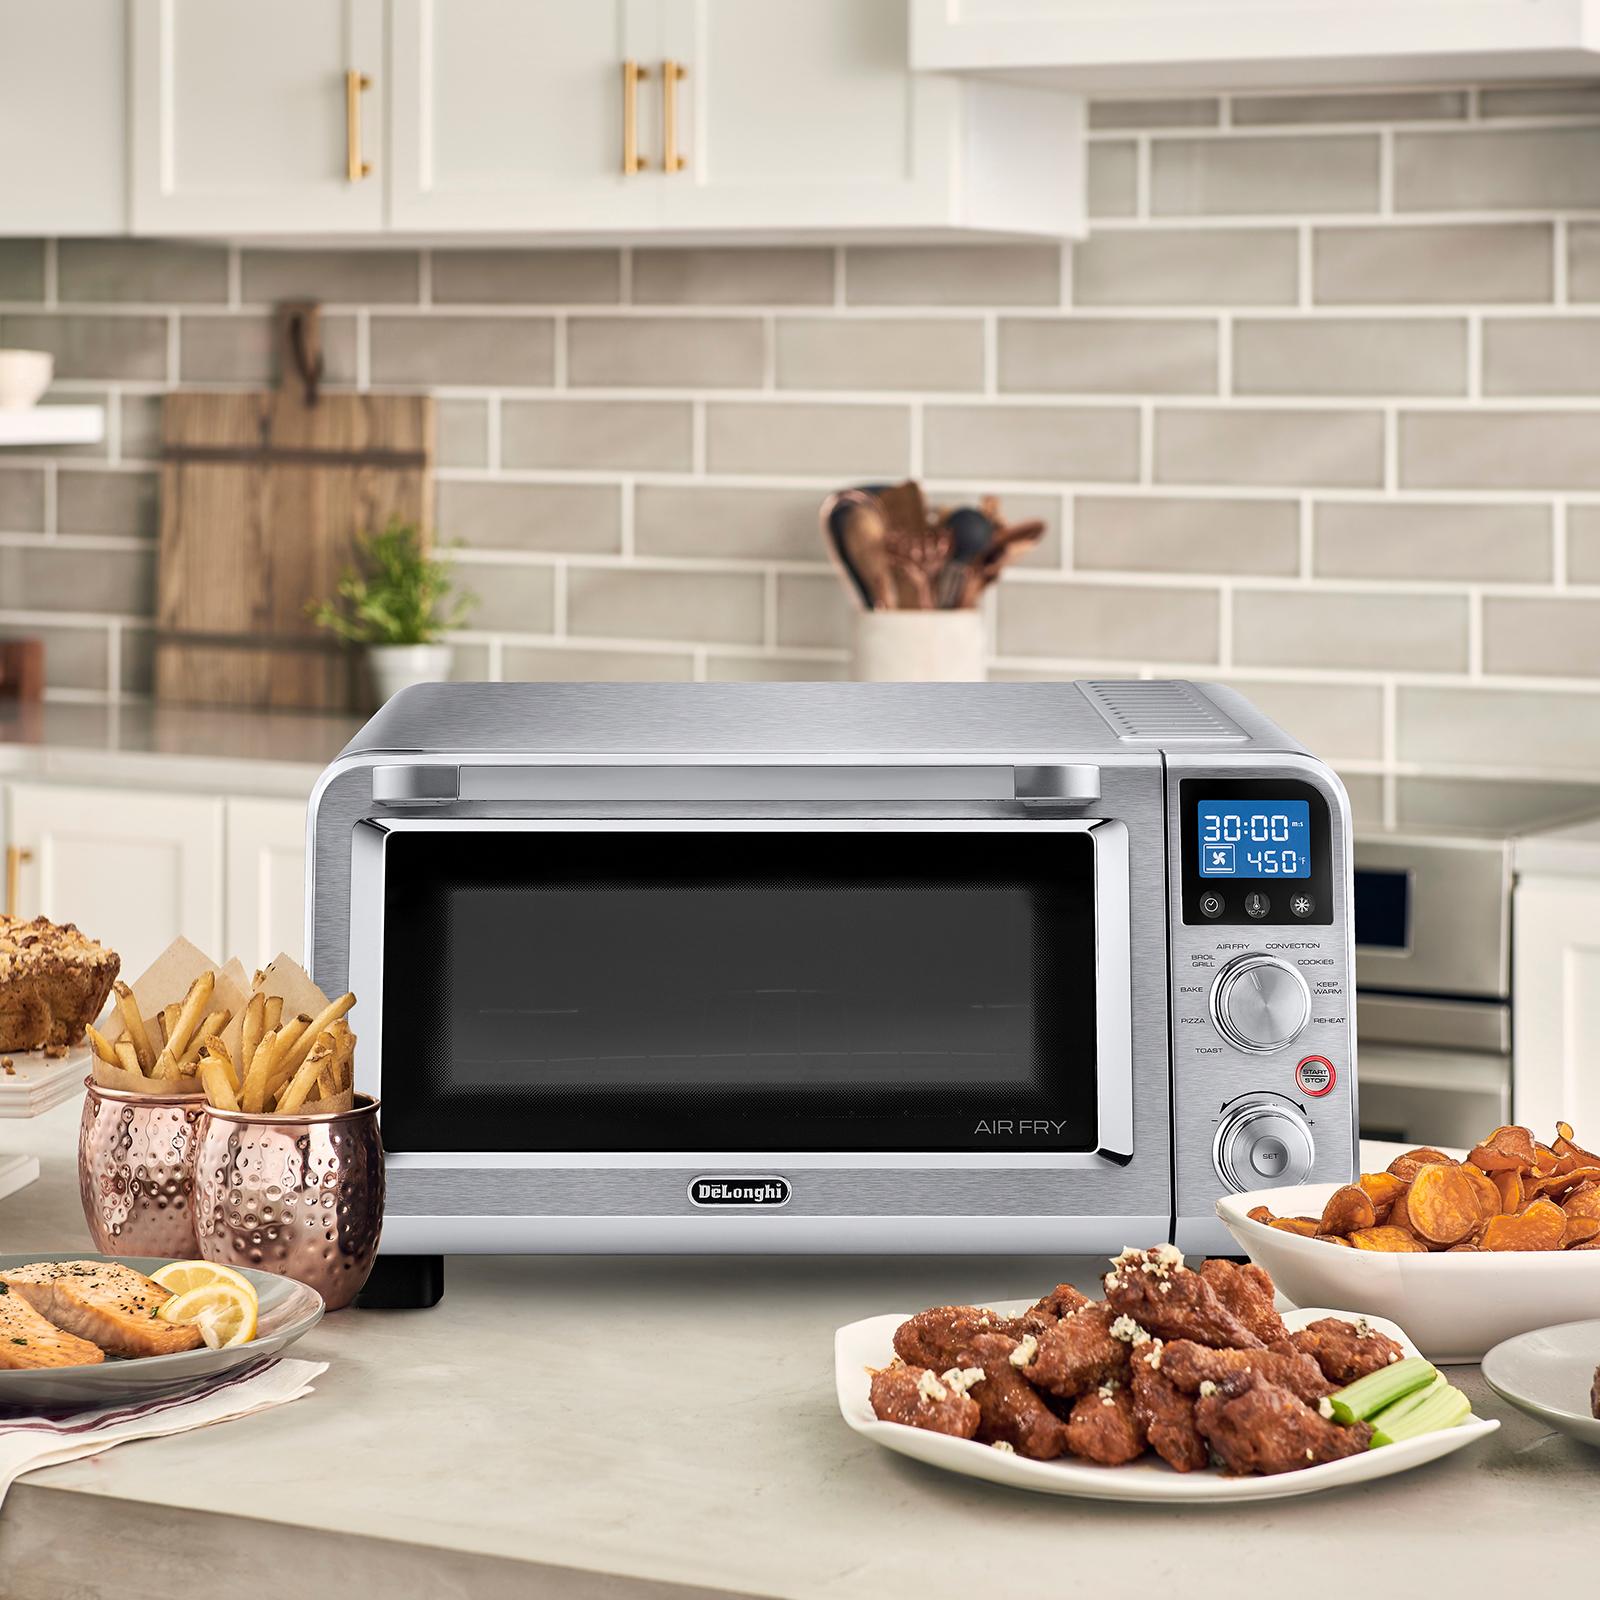  De'Longhi Livenza Compact Digital Oven, 0.5 cu. ft, stainless  steel: Home & Kitchen